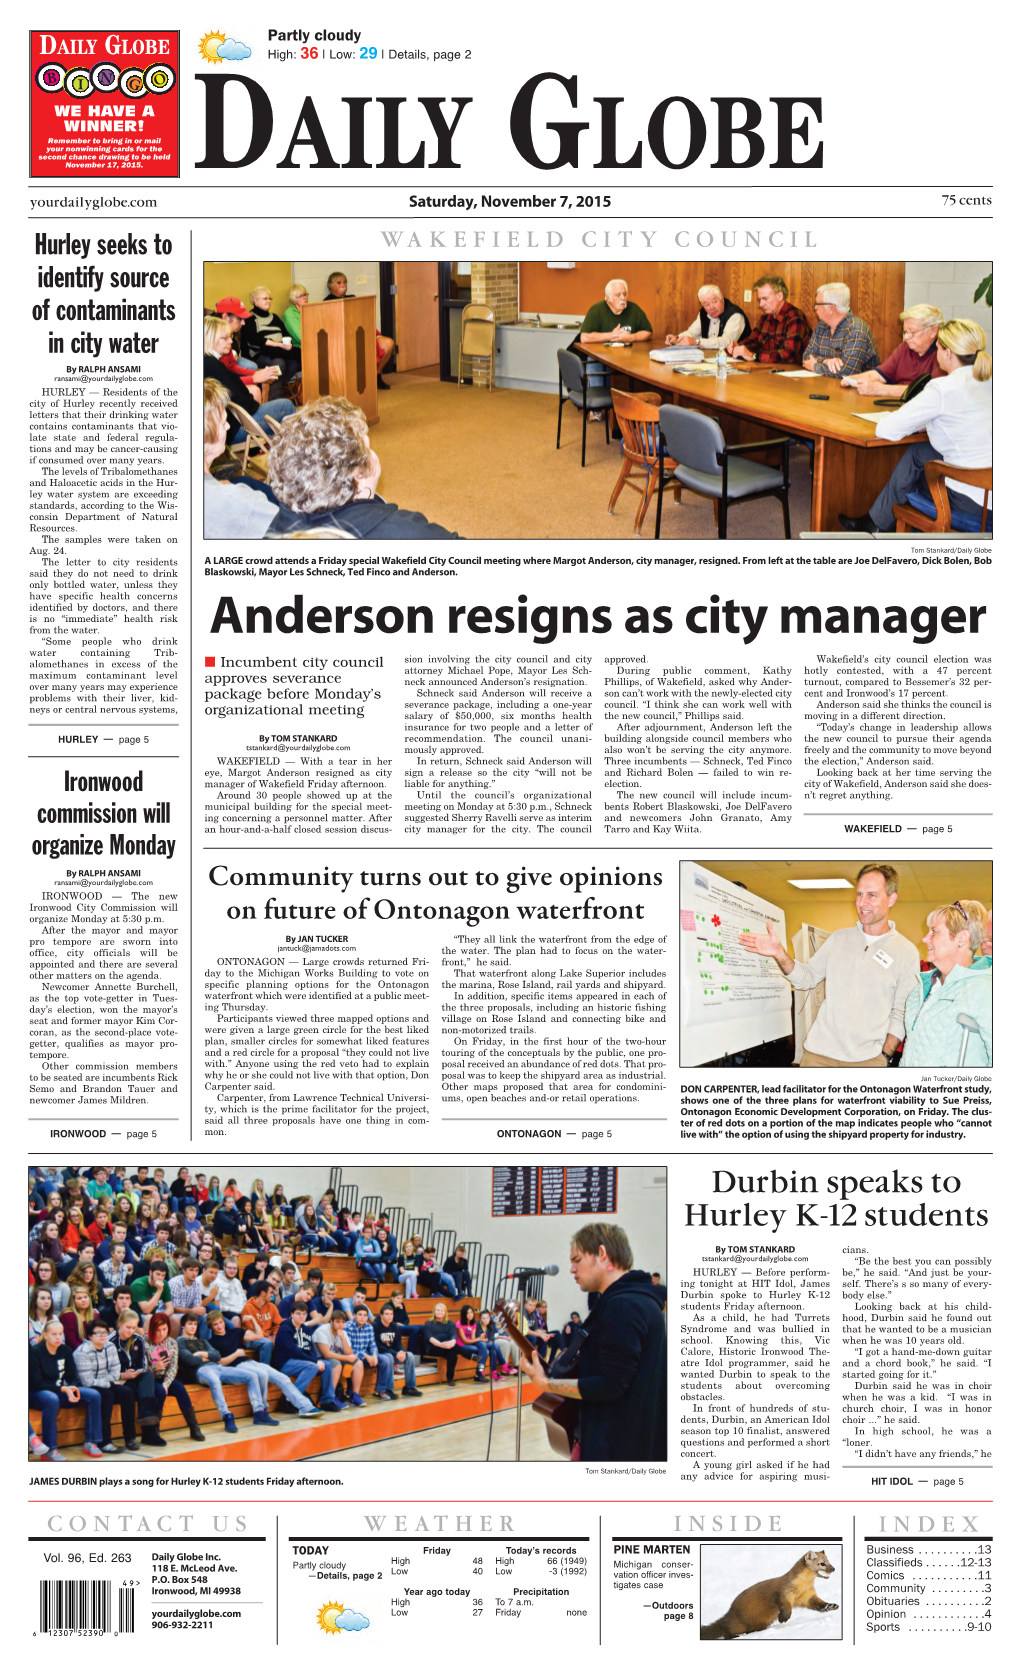 Anderson Resigns As City Manager “Some People Who Drink Water Containing Trib- Sion Involving the City Council and City Alomethanes in Excess of the Approved